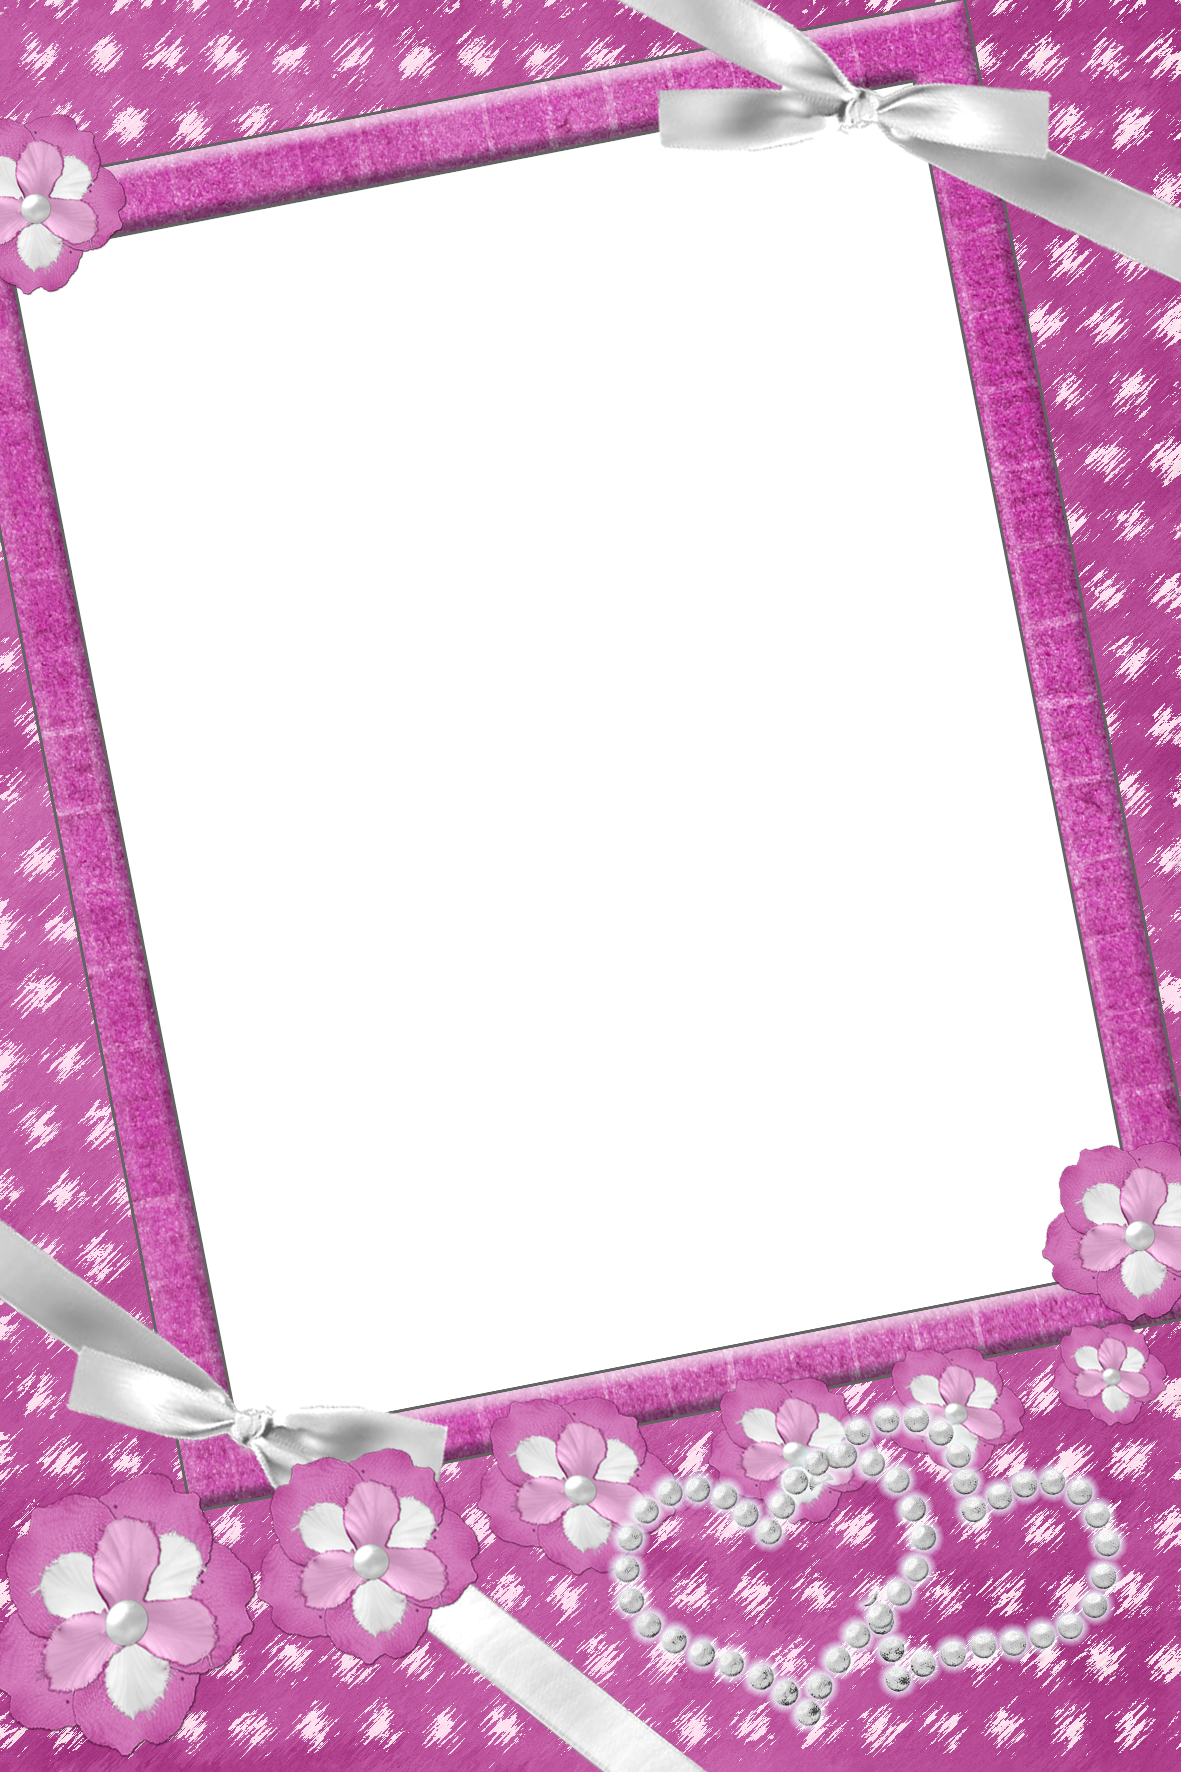 Download PNG image - Fuchsia Border Frame PNG Clipart 